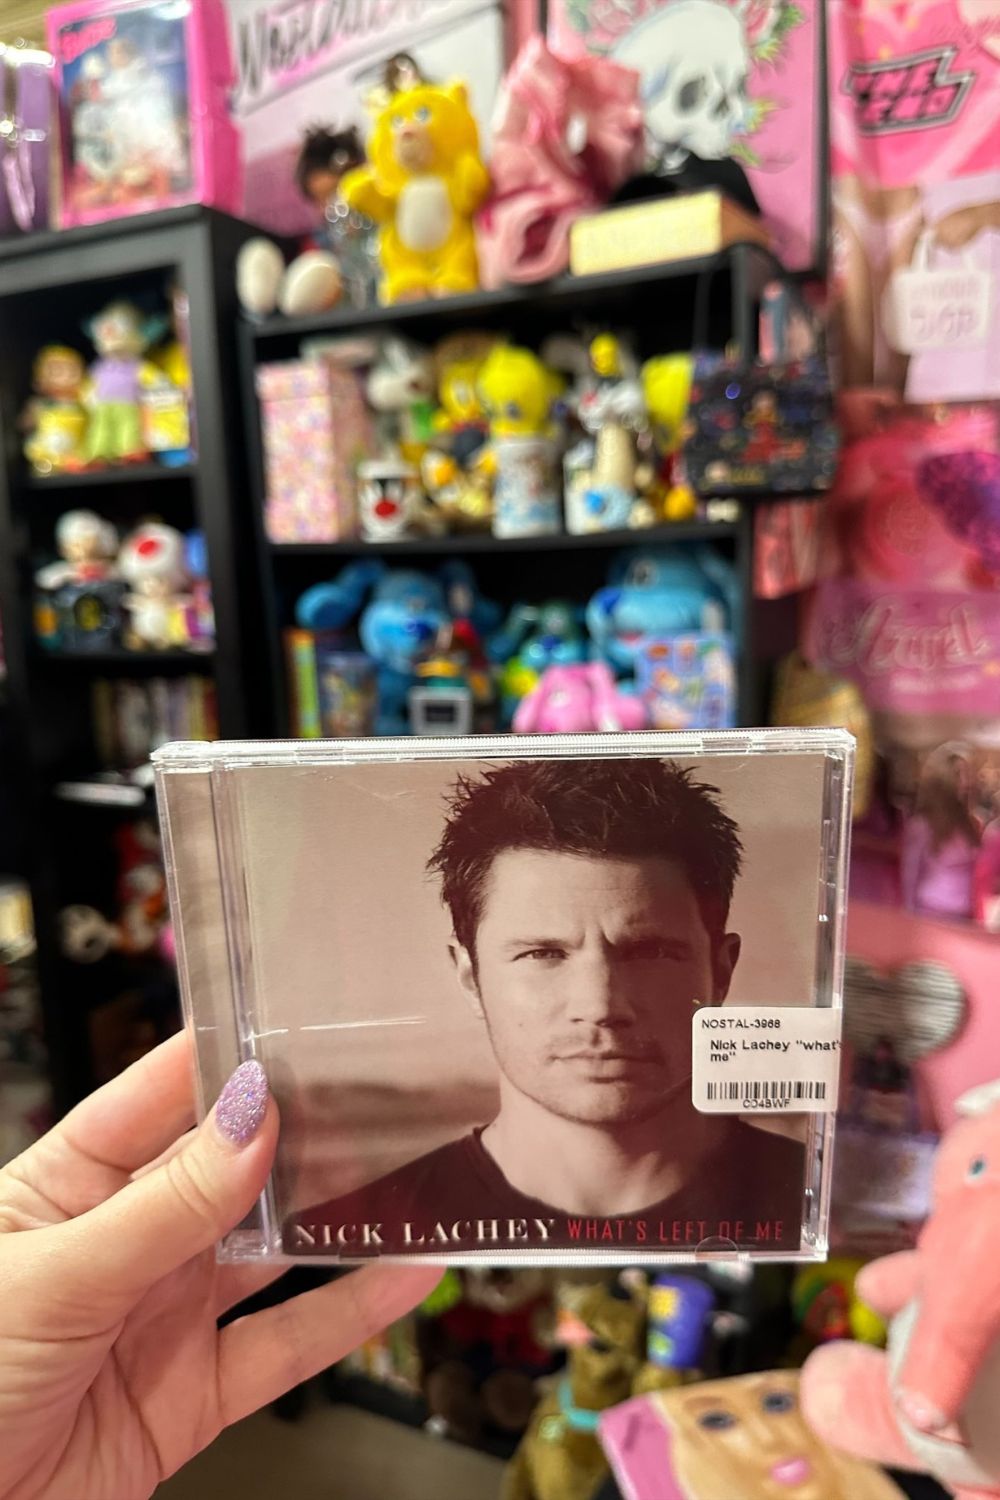 NICK LACHEY “WHAT’S LEFT OF ME”(D)*